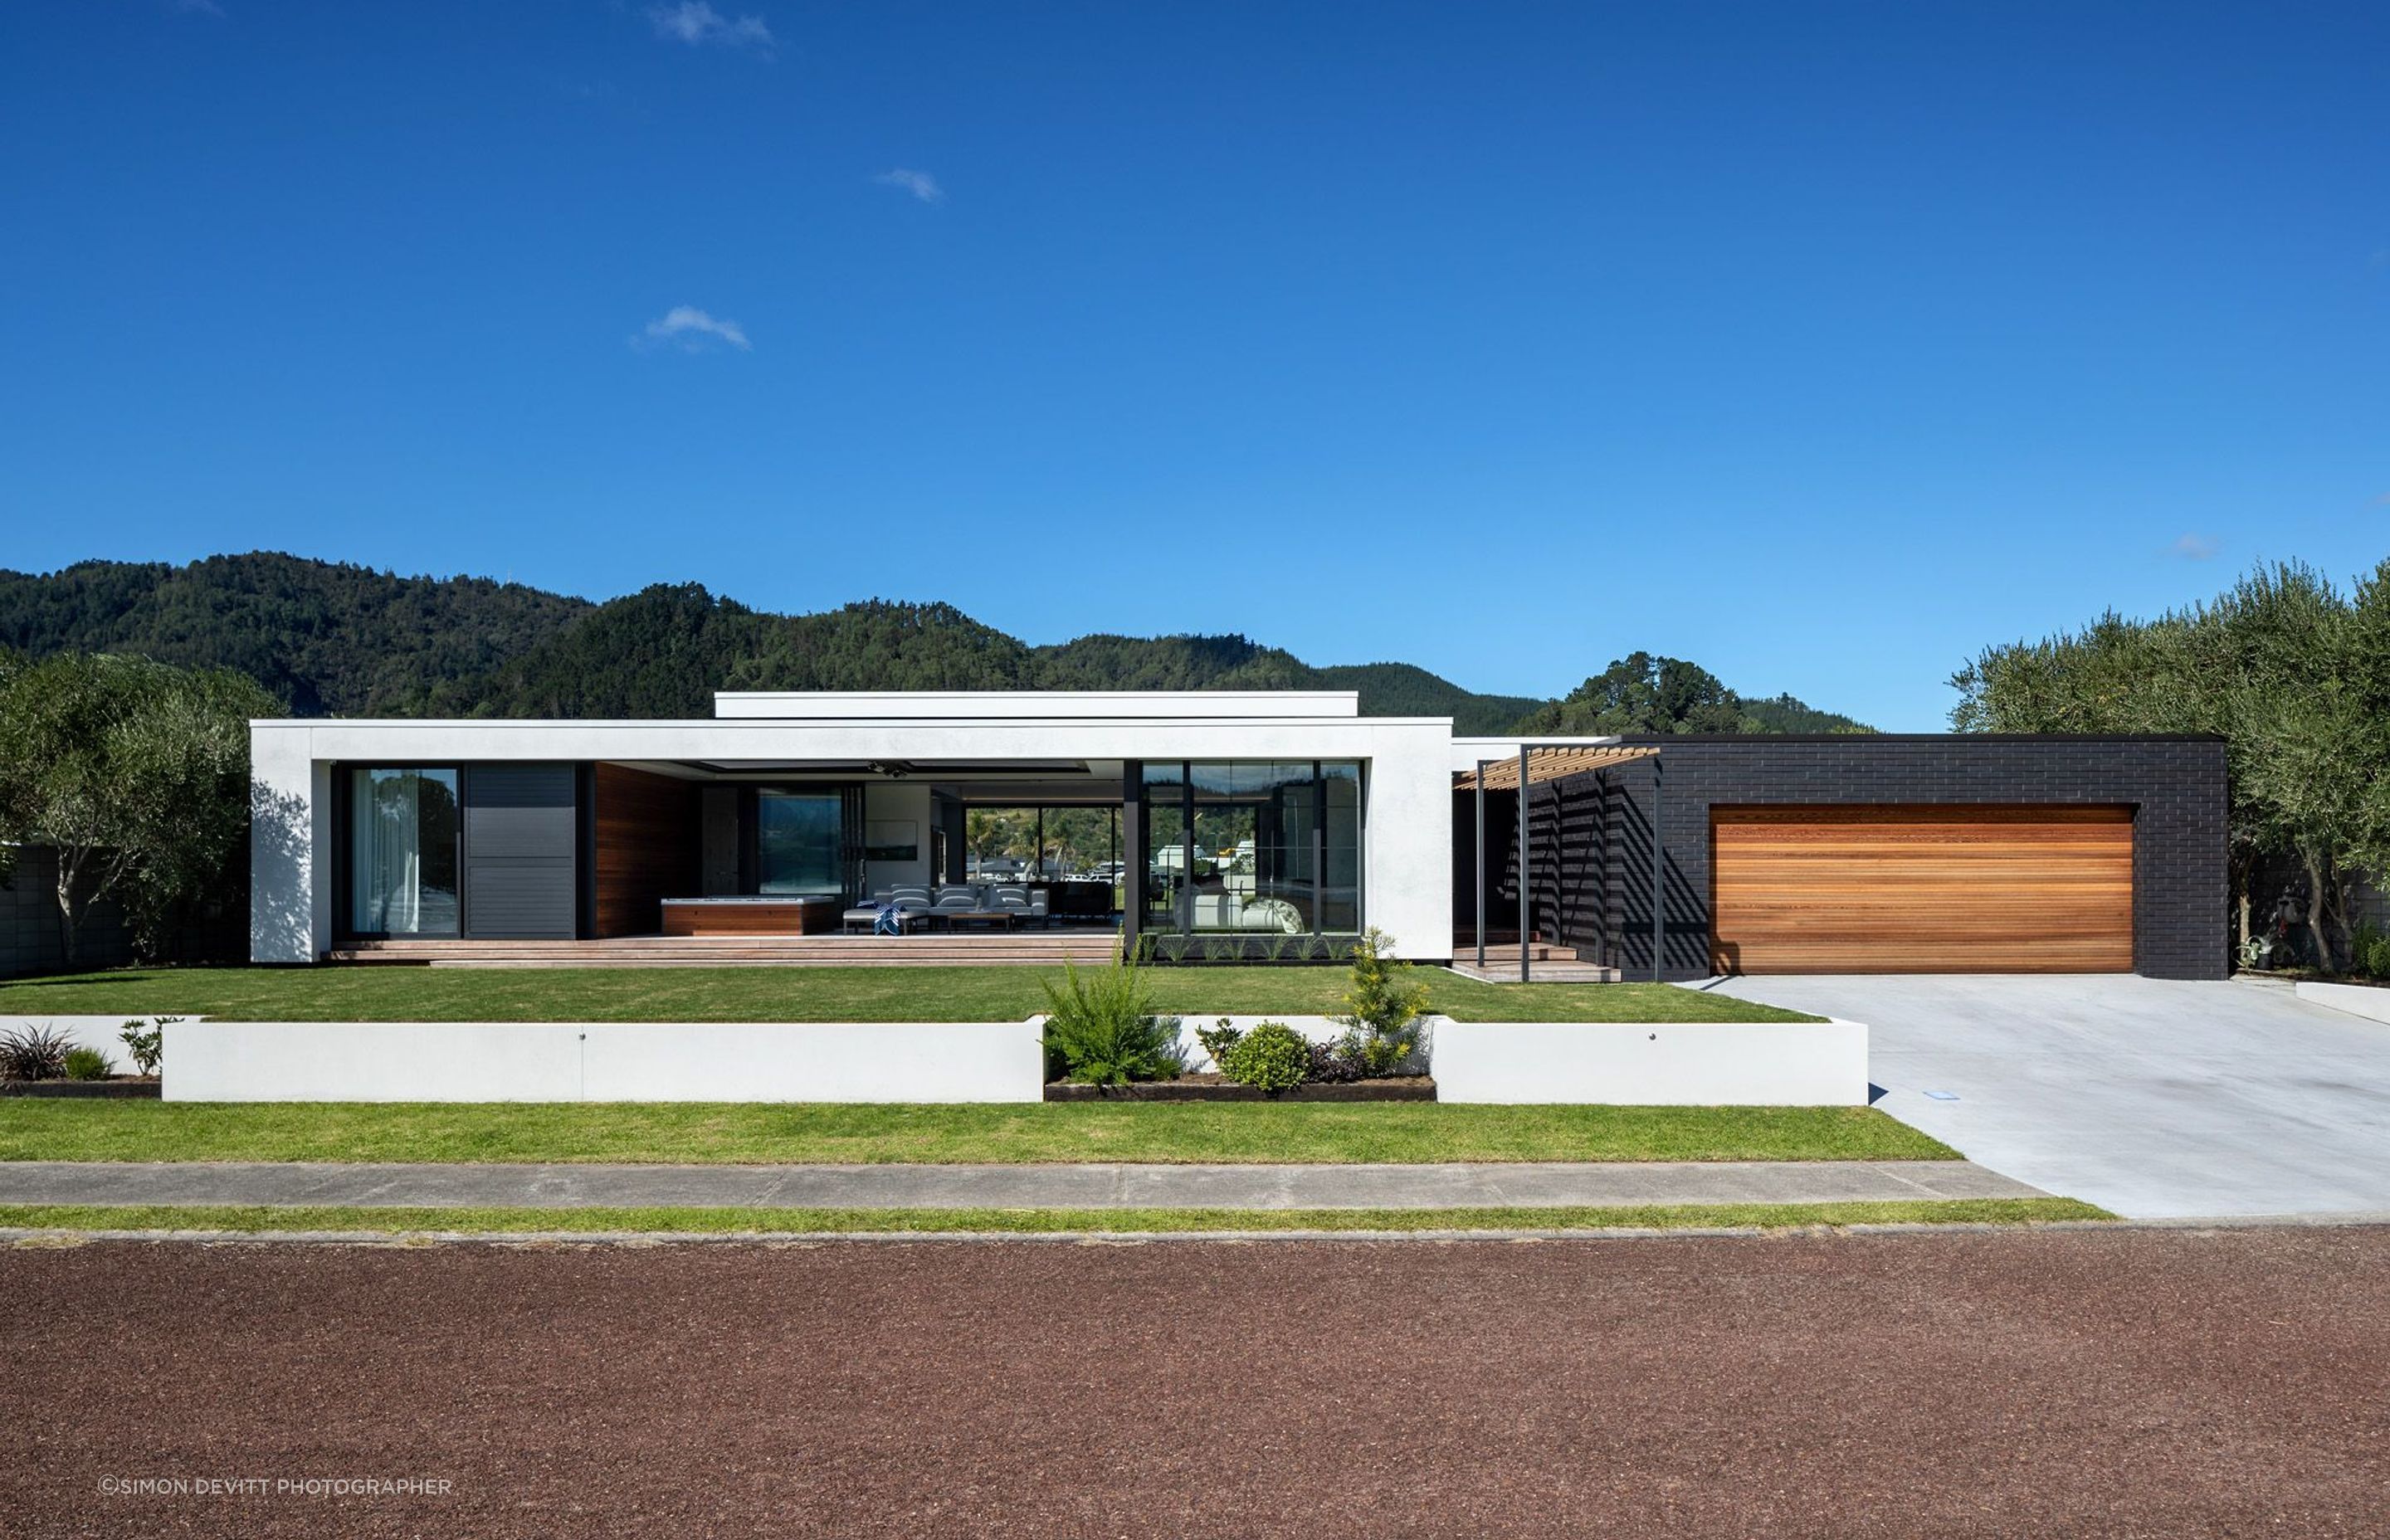 The view from the street shows the clean lines of the pavilion form with its contrasting materials defining the house from the garage.